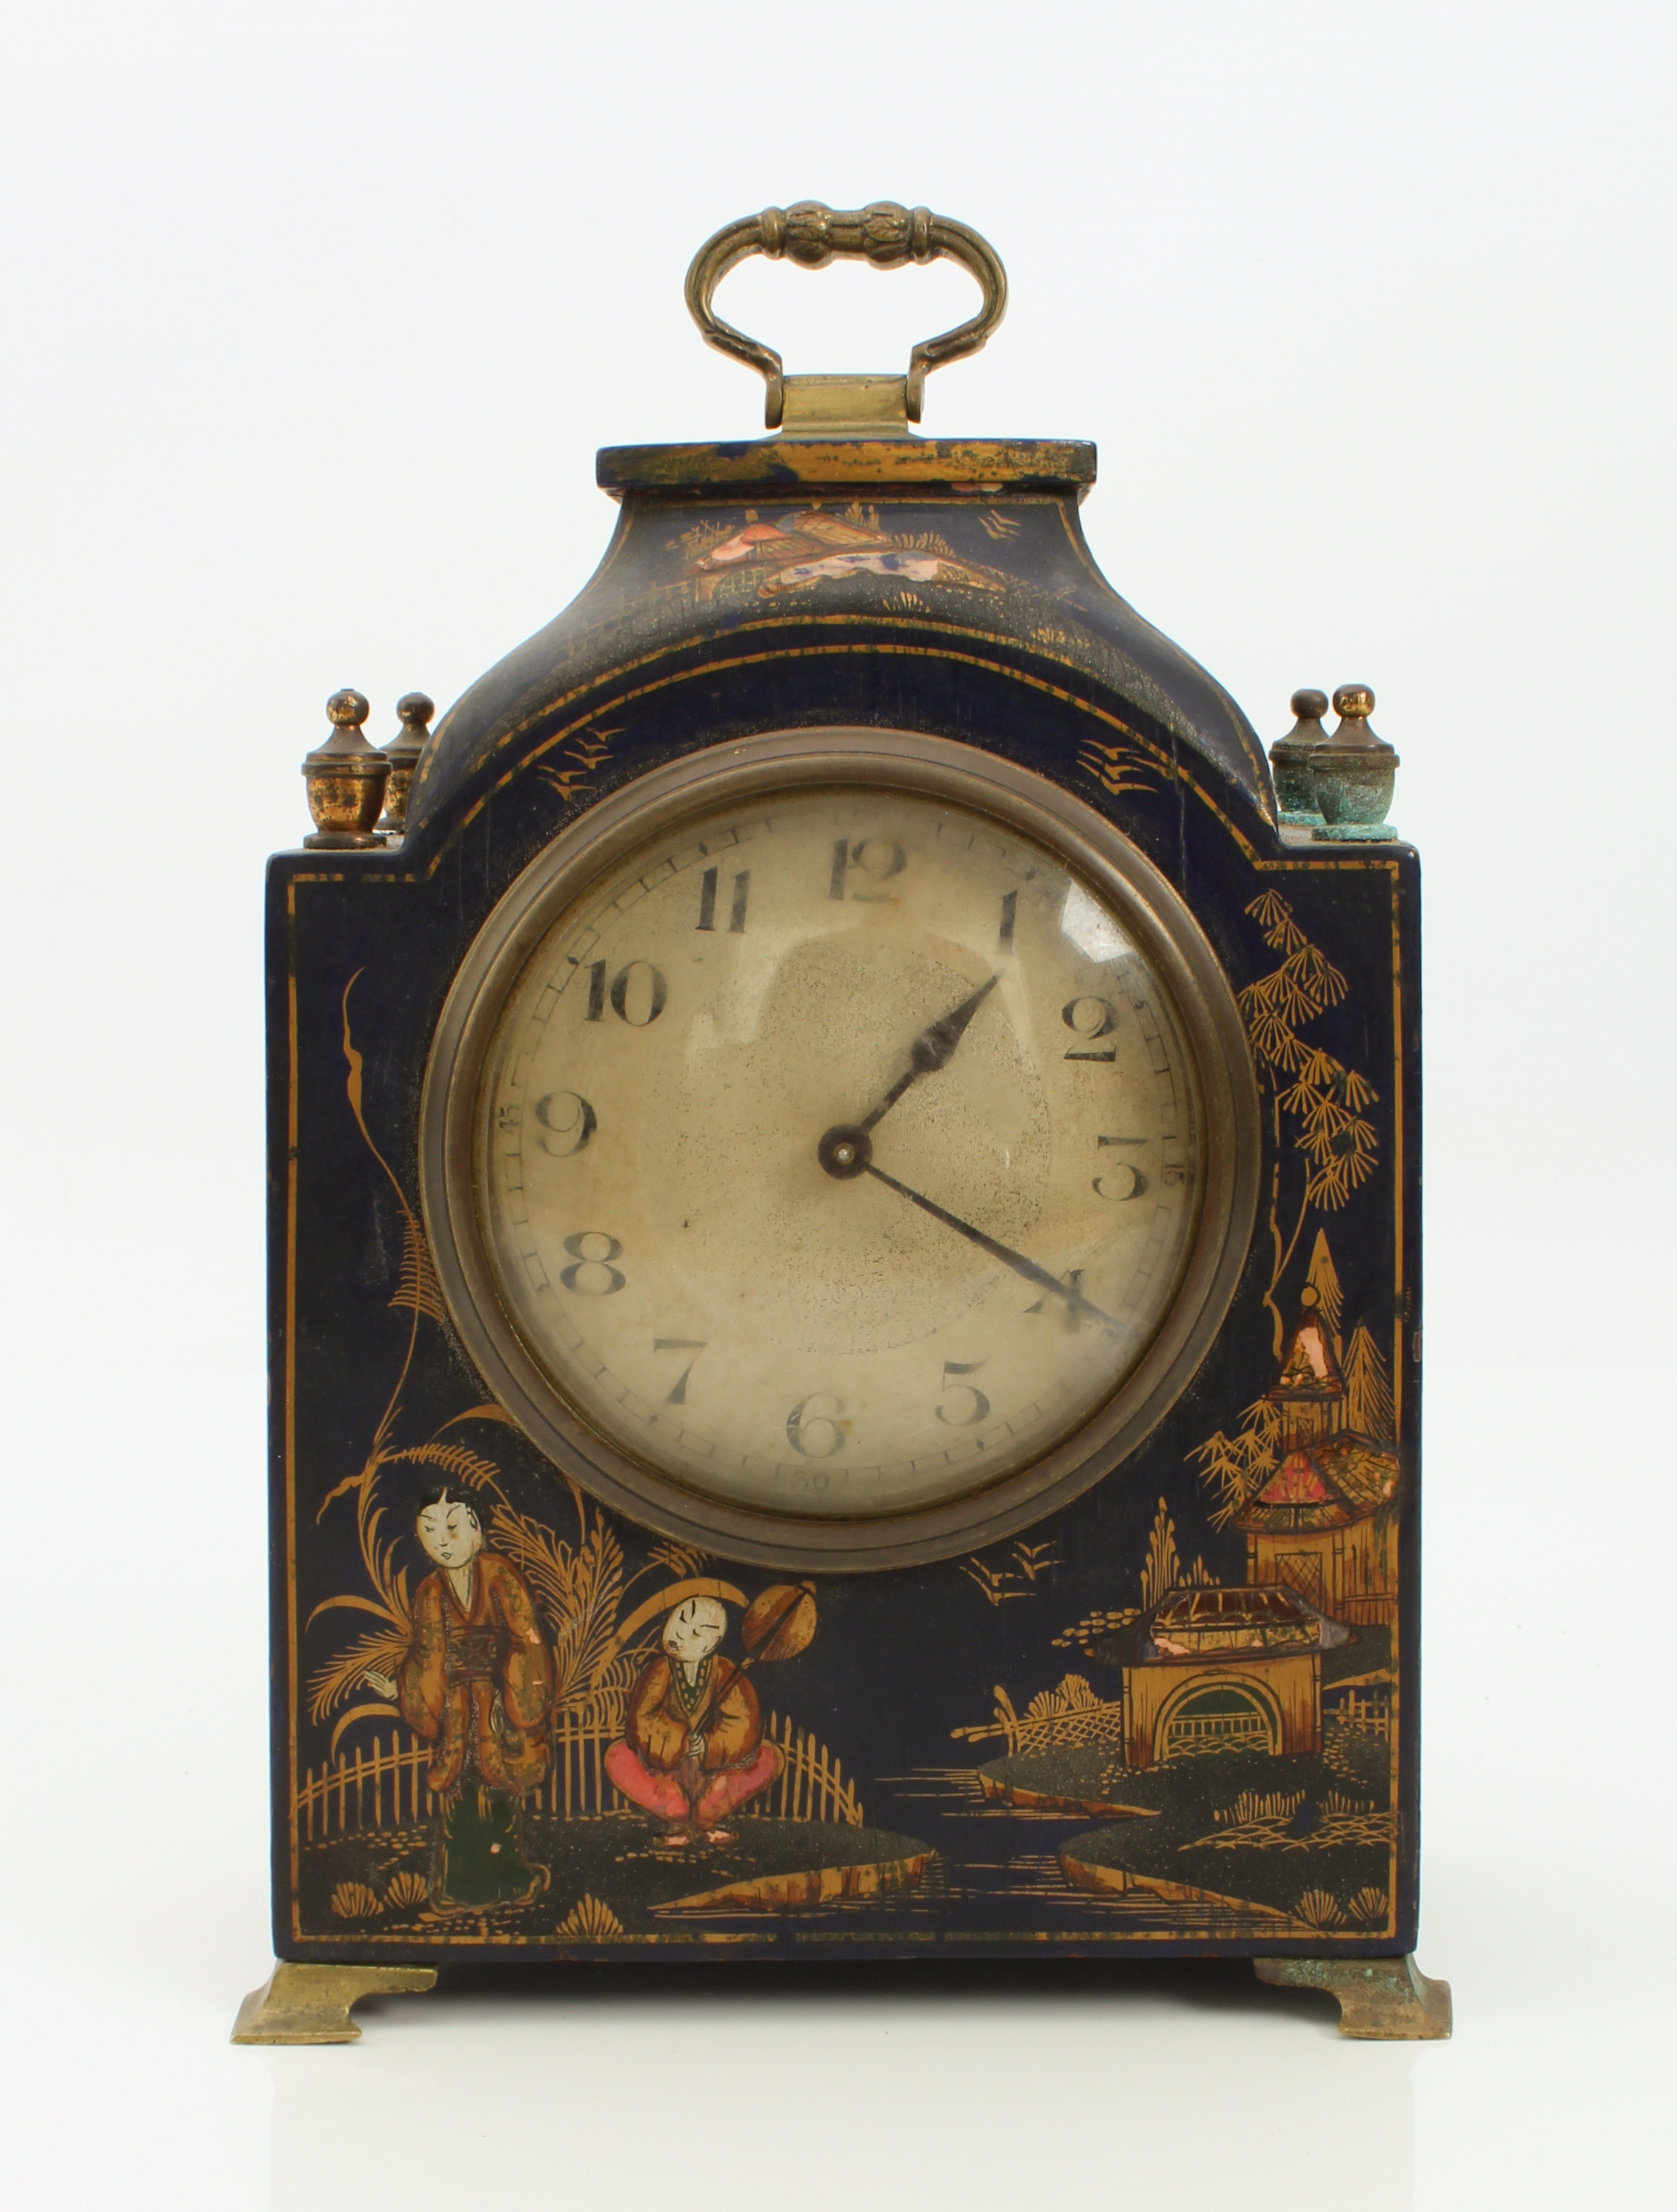 A brass-mounted desk or mantel clock in the Chinoiserie style - late-19th century, silvered 3¼ in - Image 6 of 10